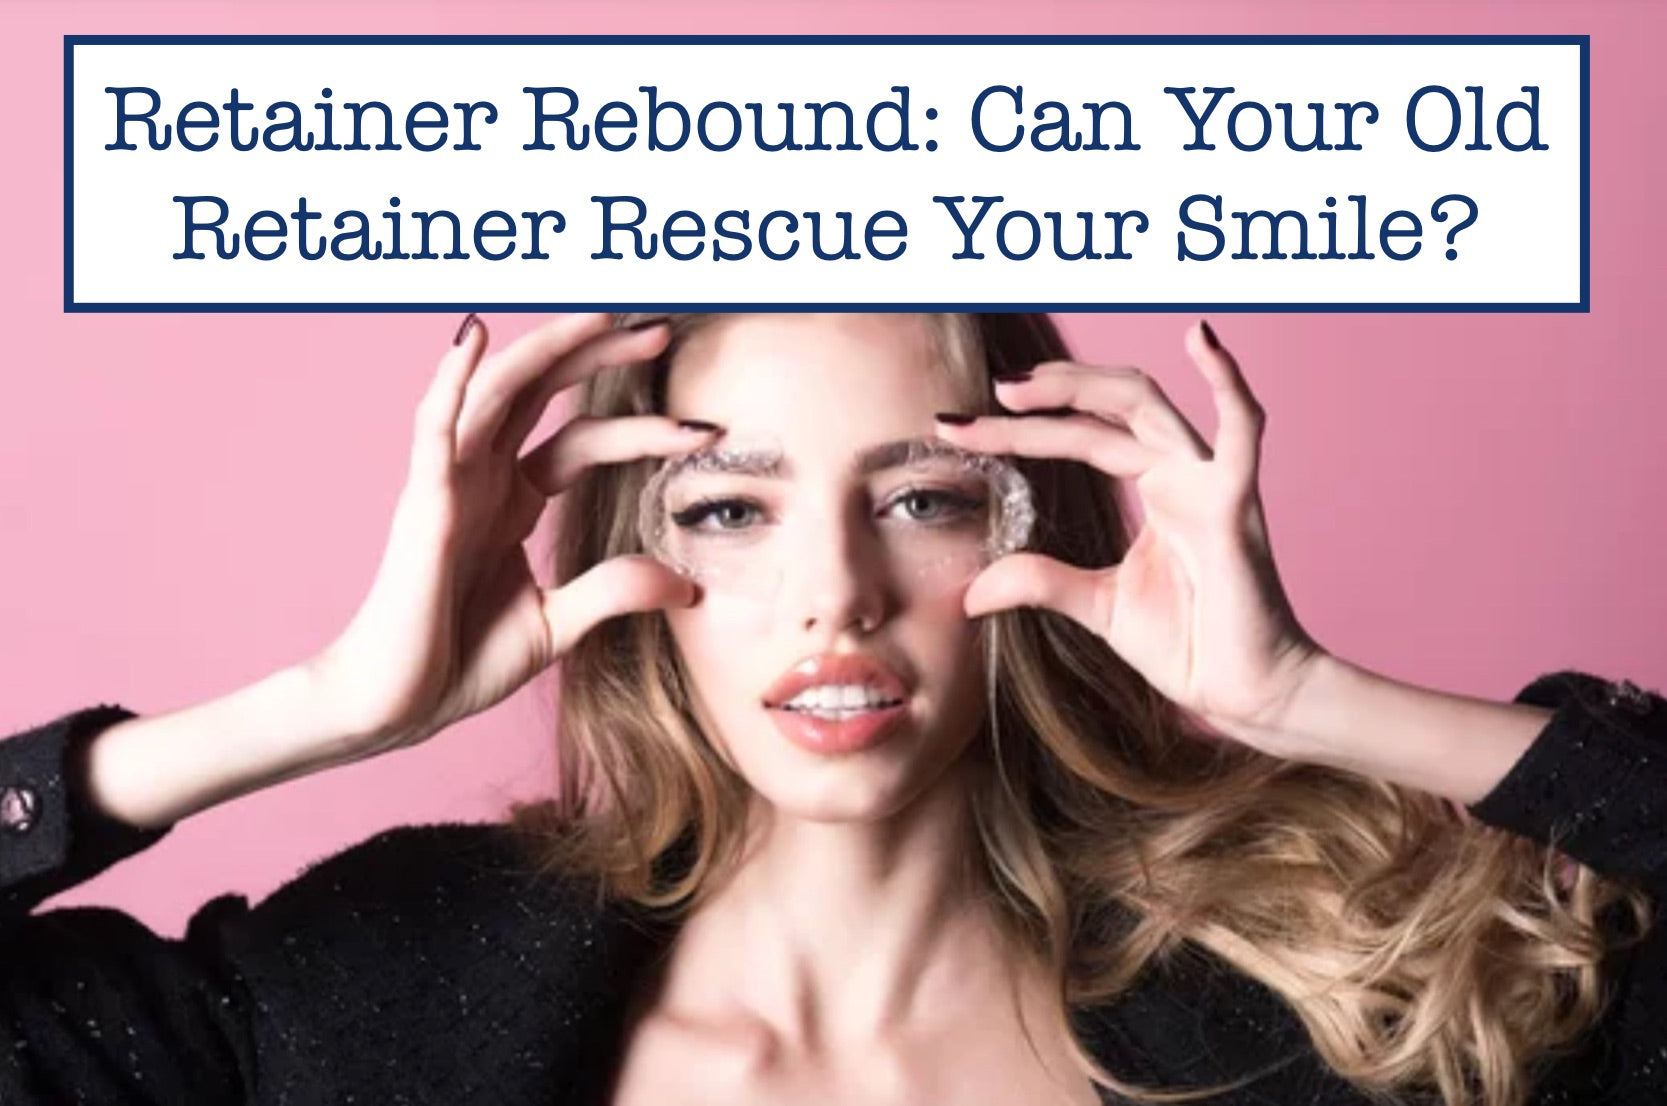 Retainer Rebound: Can Your Old Retainer Rescue Your Smile?